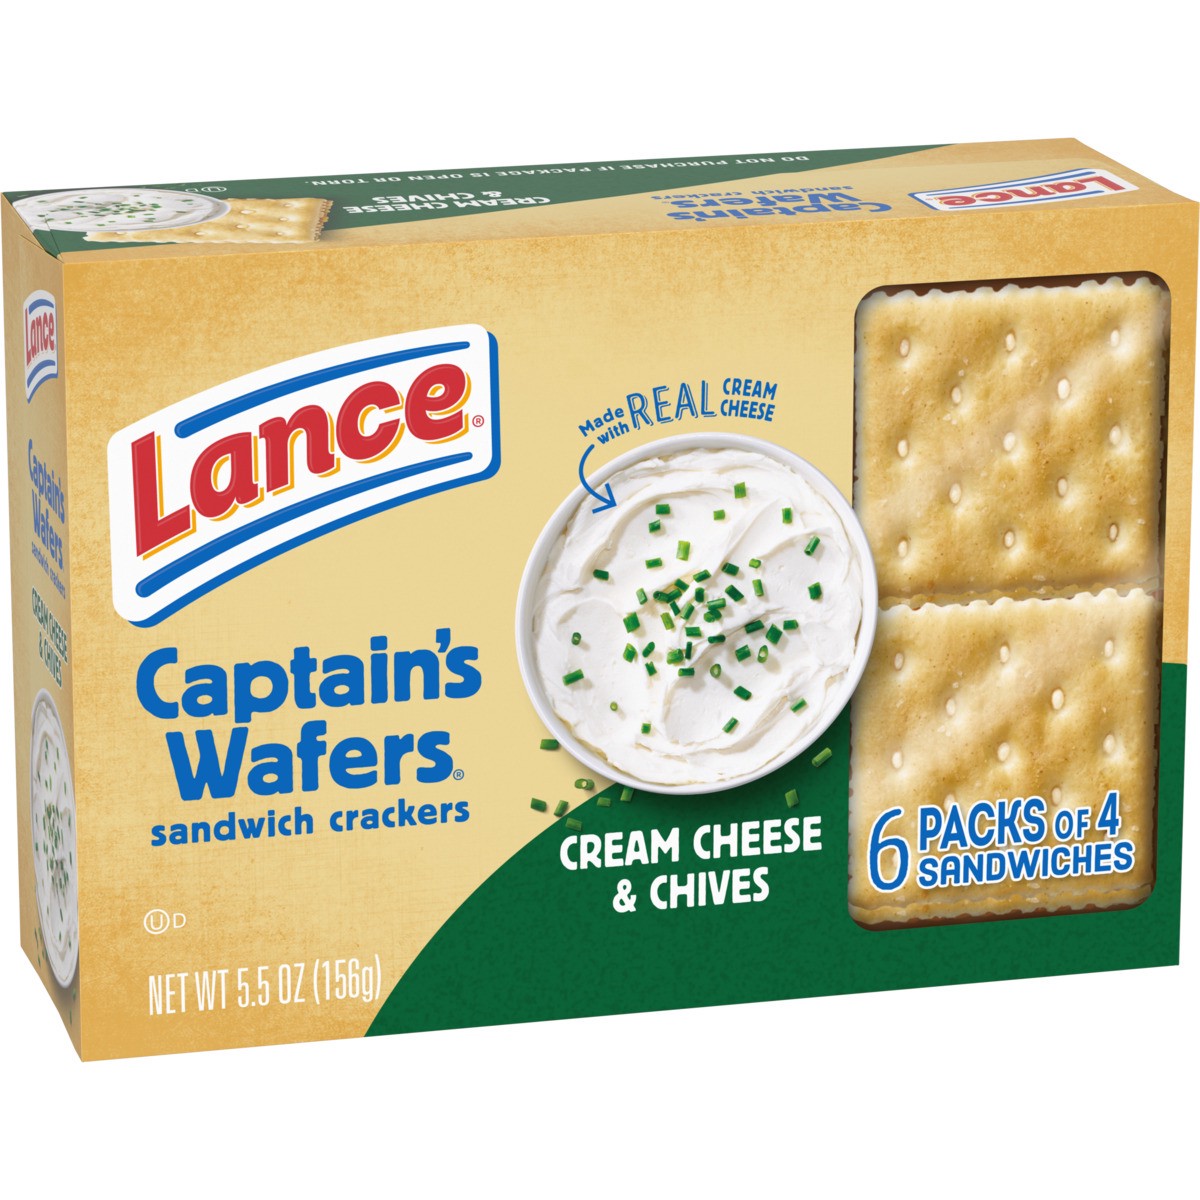 slide 6 of 11, Lance Sandwich Crackers, Captain's Wafers Cream Cheese and Chives, 6 Packs, 4 Sandwiches Each, 5.5 oz